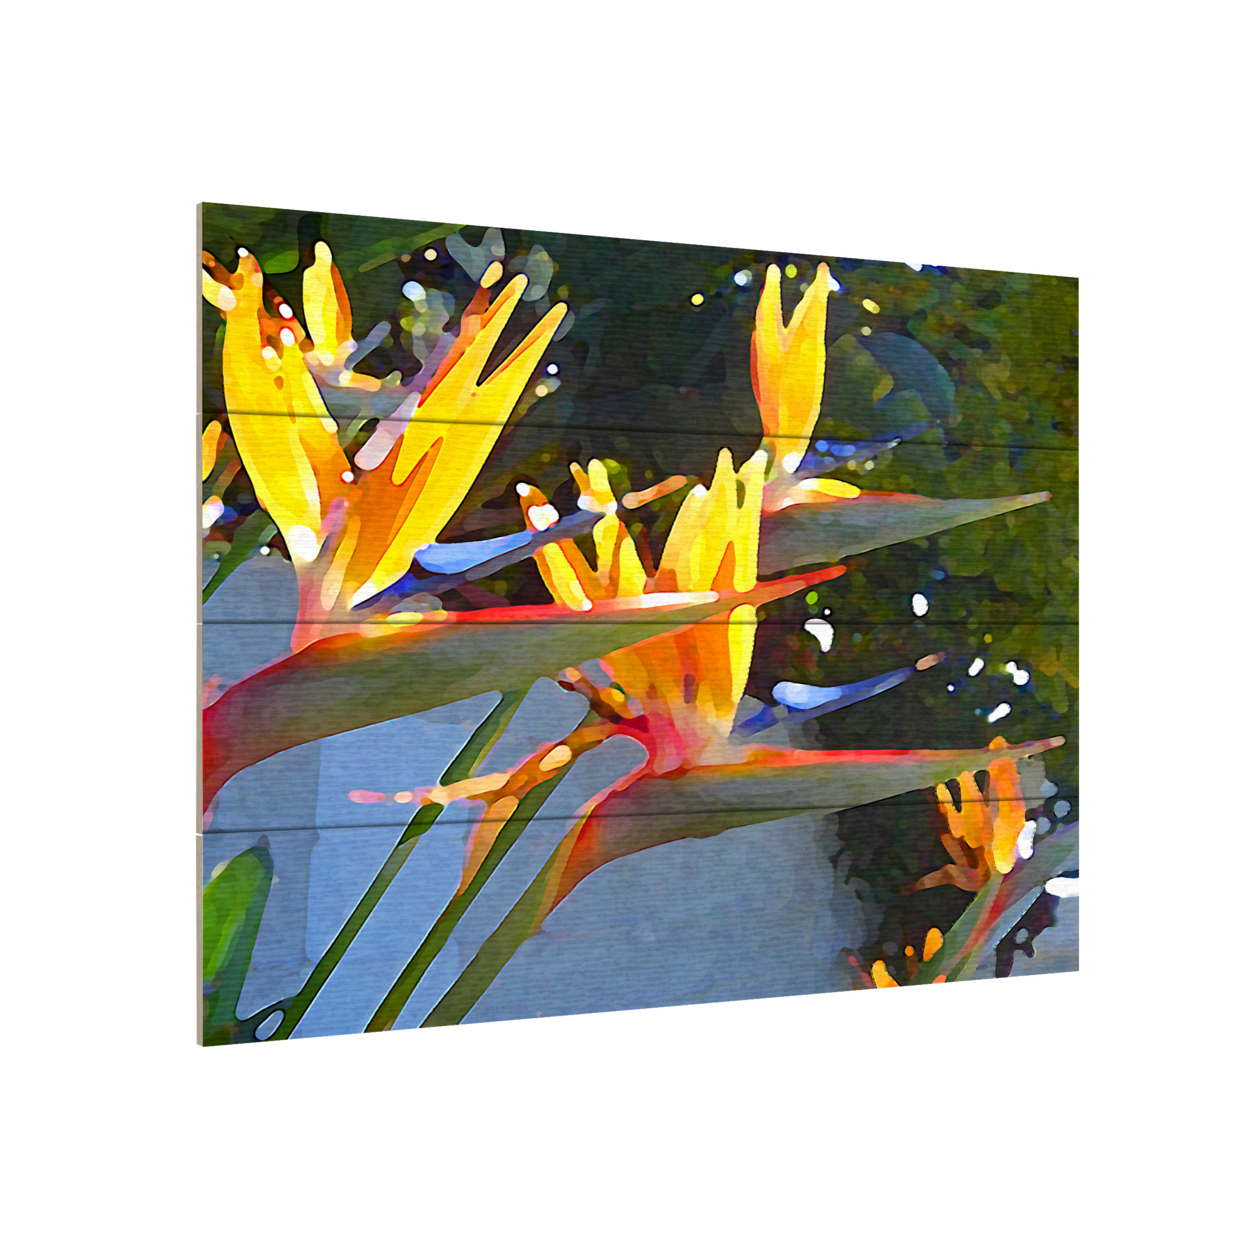 Wall Art 12 X 16 Inches Titled Bird Of Paradise Backlit By Sun Ready To Hang Printed On Wooden Planks